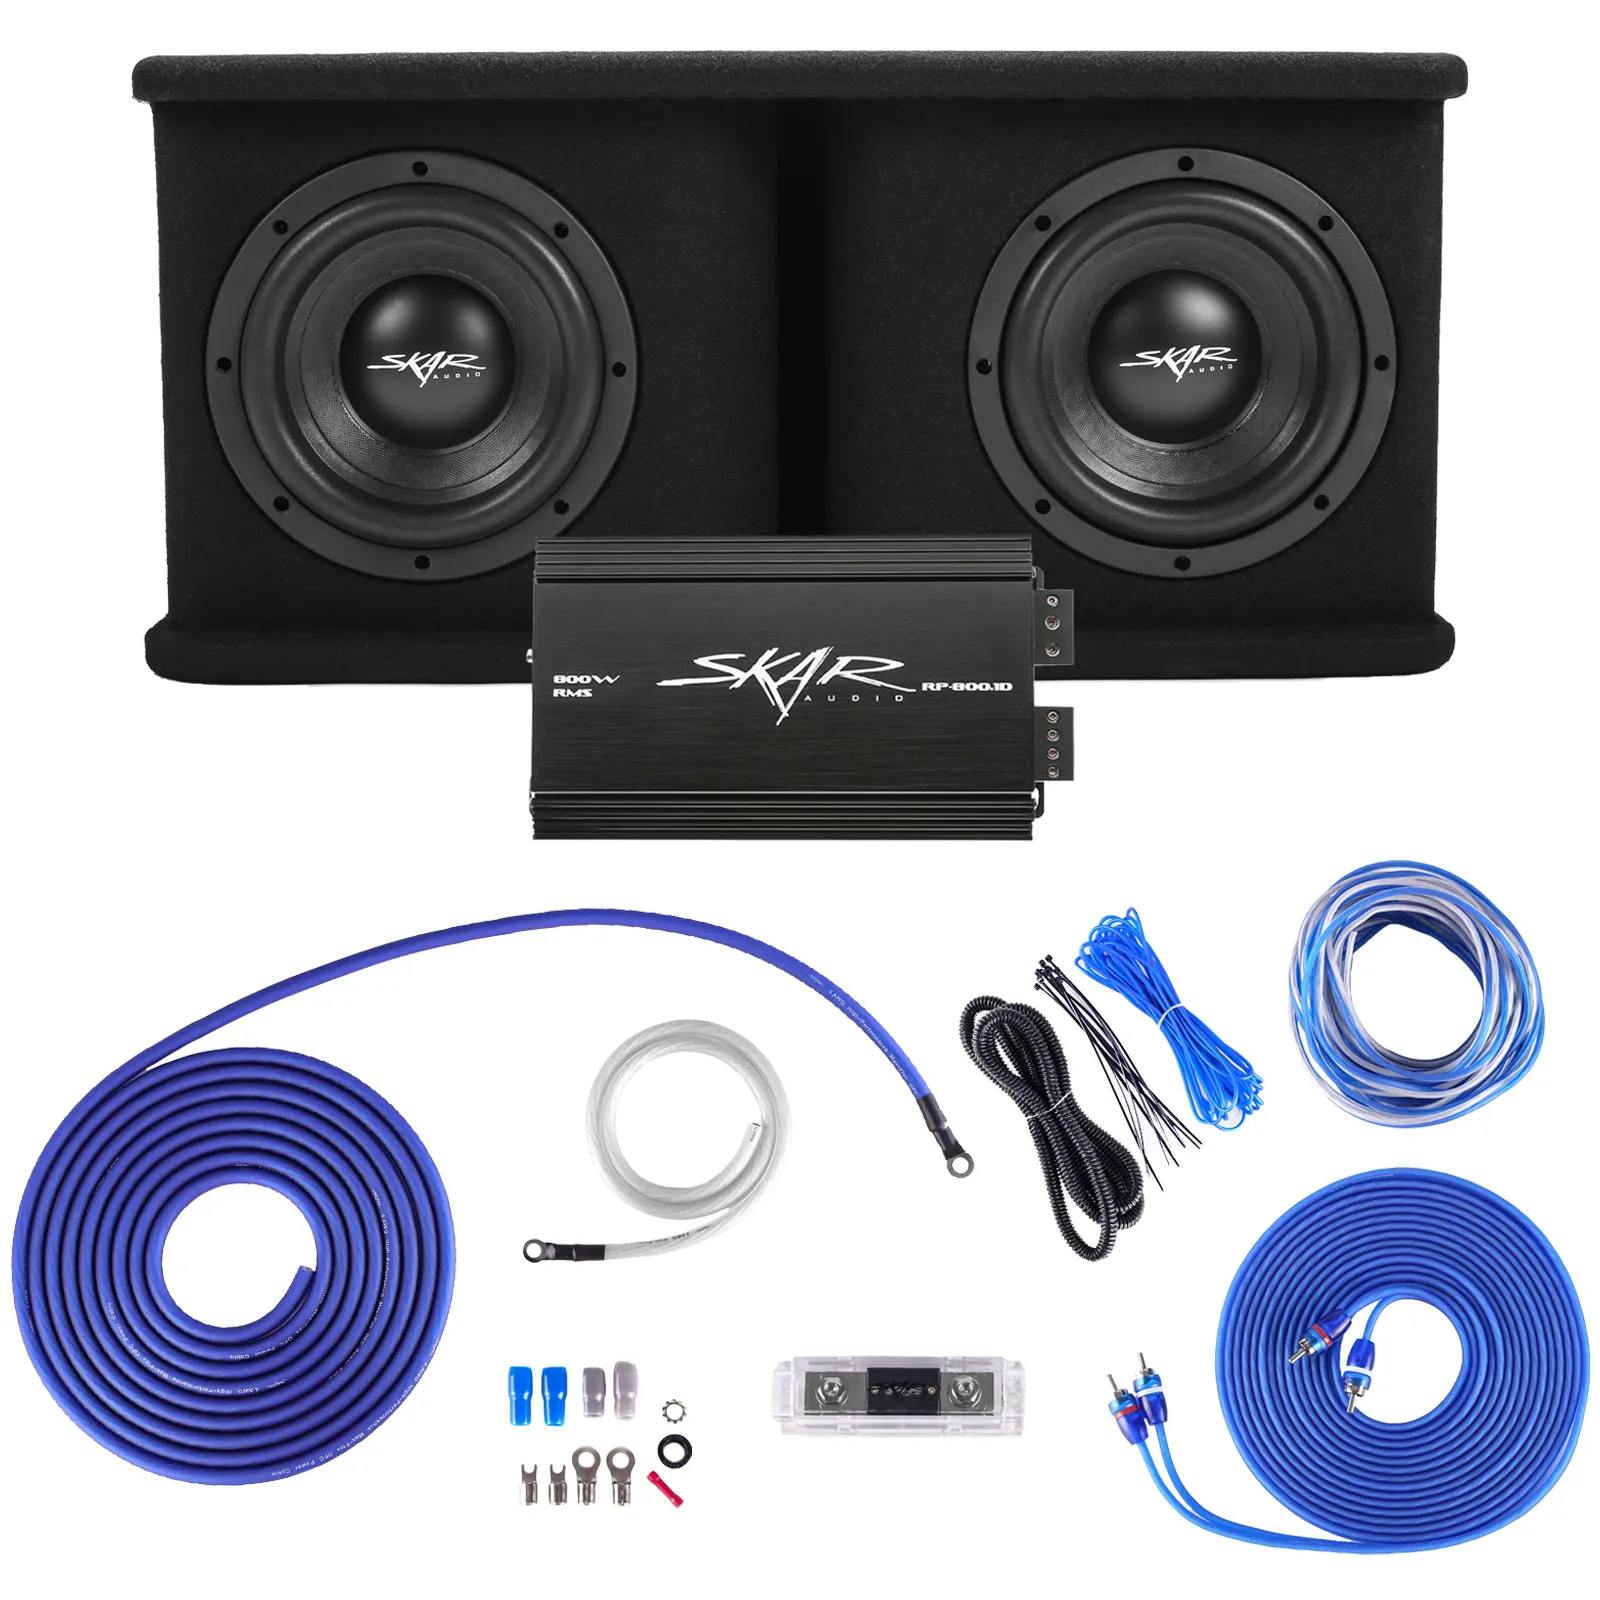 Featured Product Photo for Dual 8" 1,400 Watt SDR Series Complete Subwoofer Package with Vented Enclosure and Amplifier